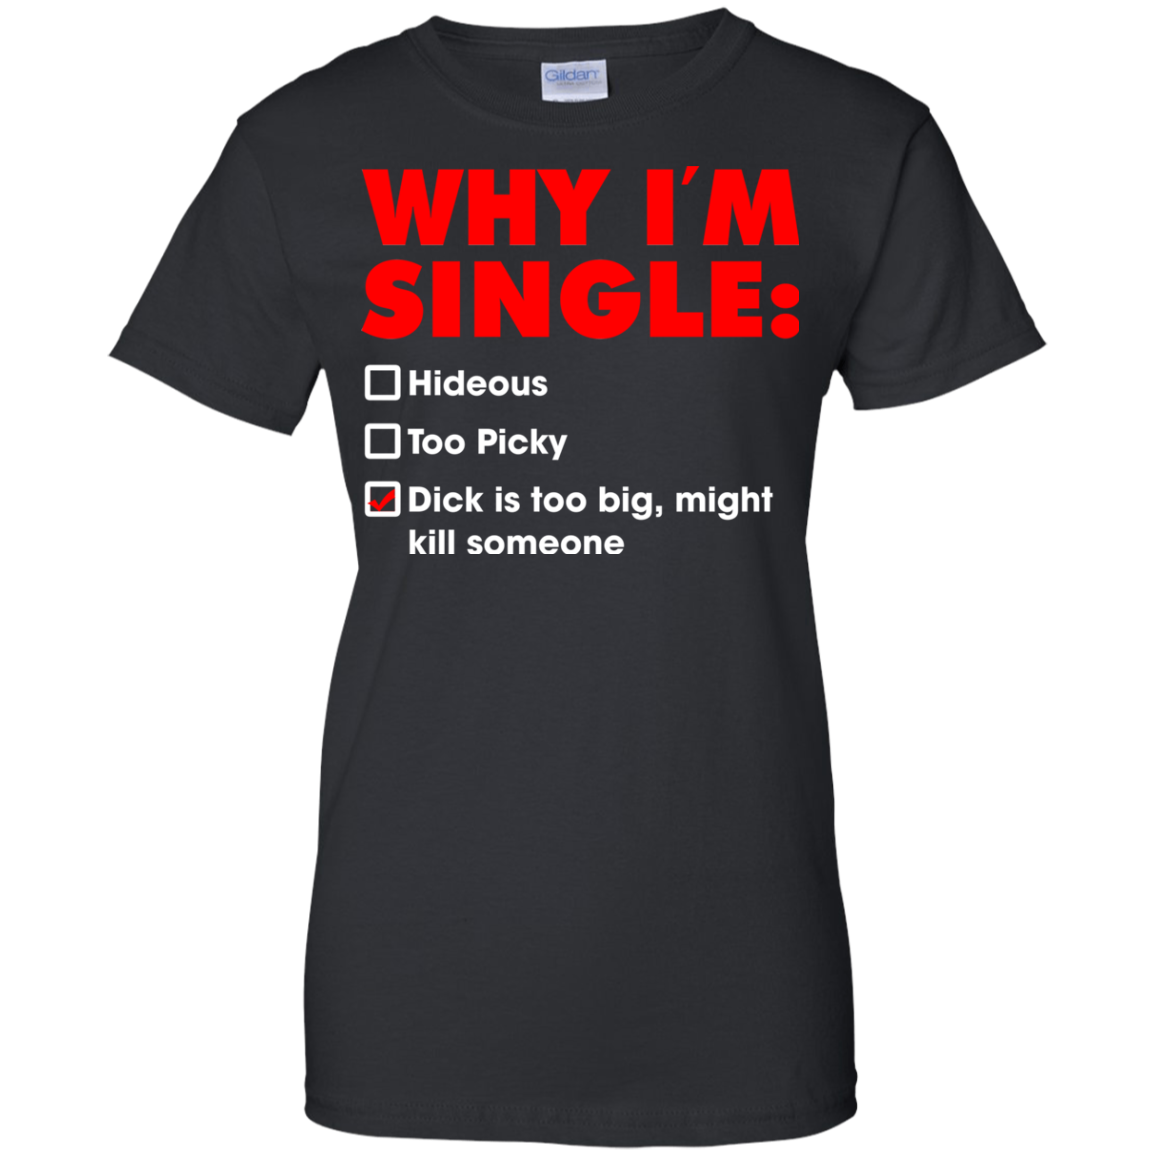 Return to Why I’m Single - Dick Is Too Big, Might Kill Someone Shirt. 